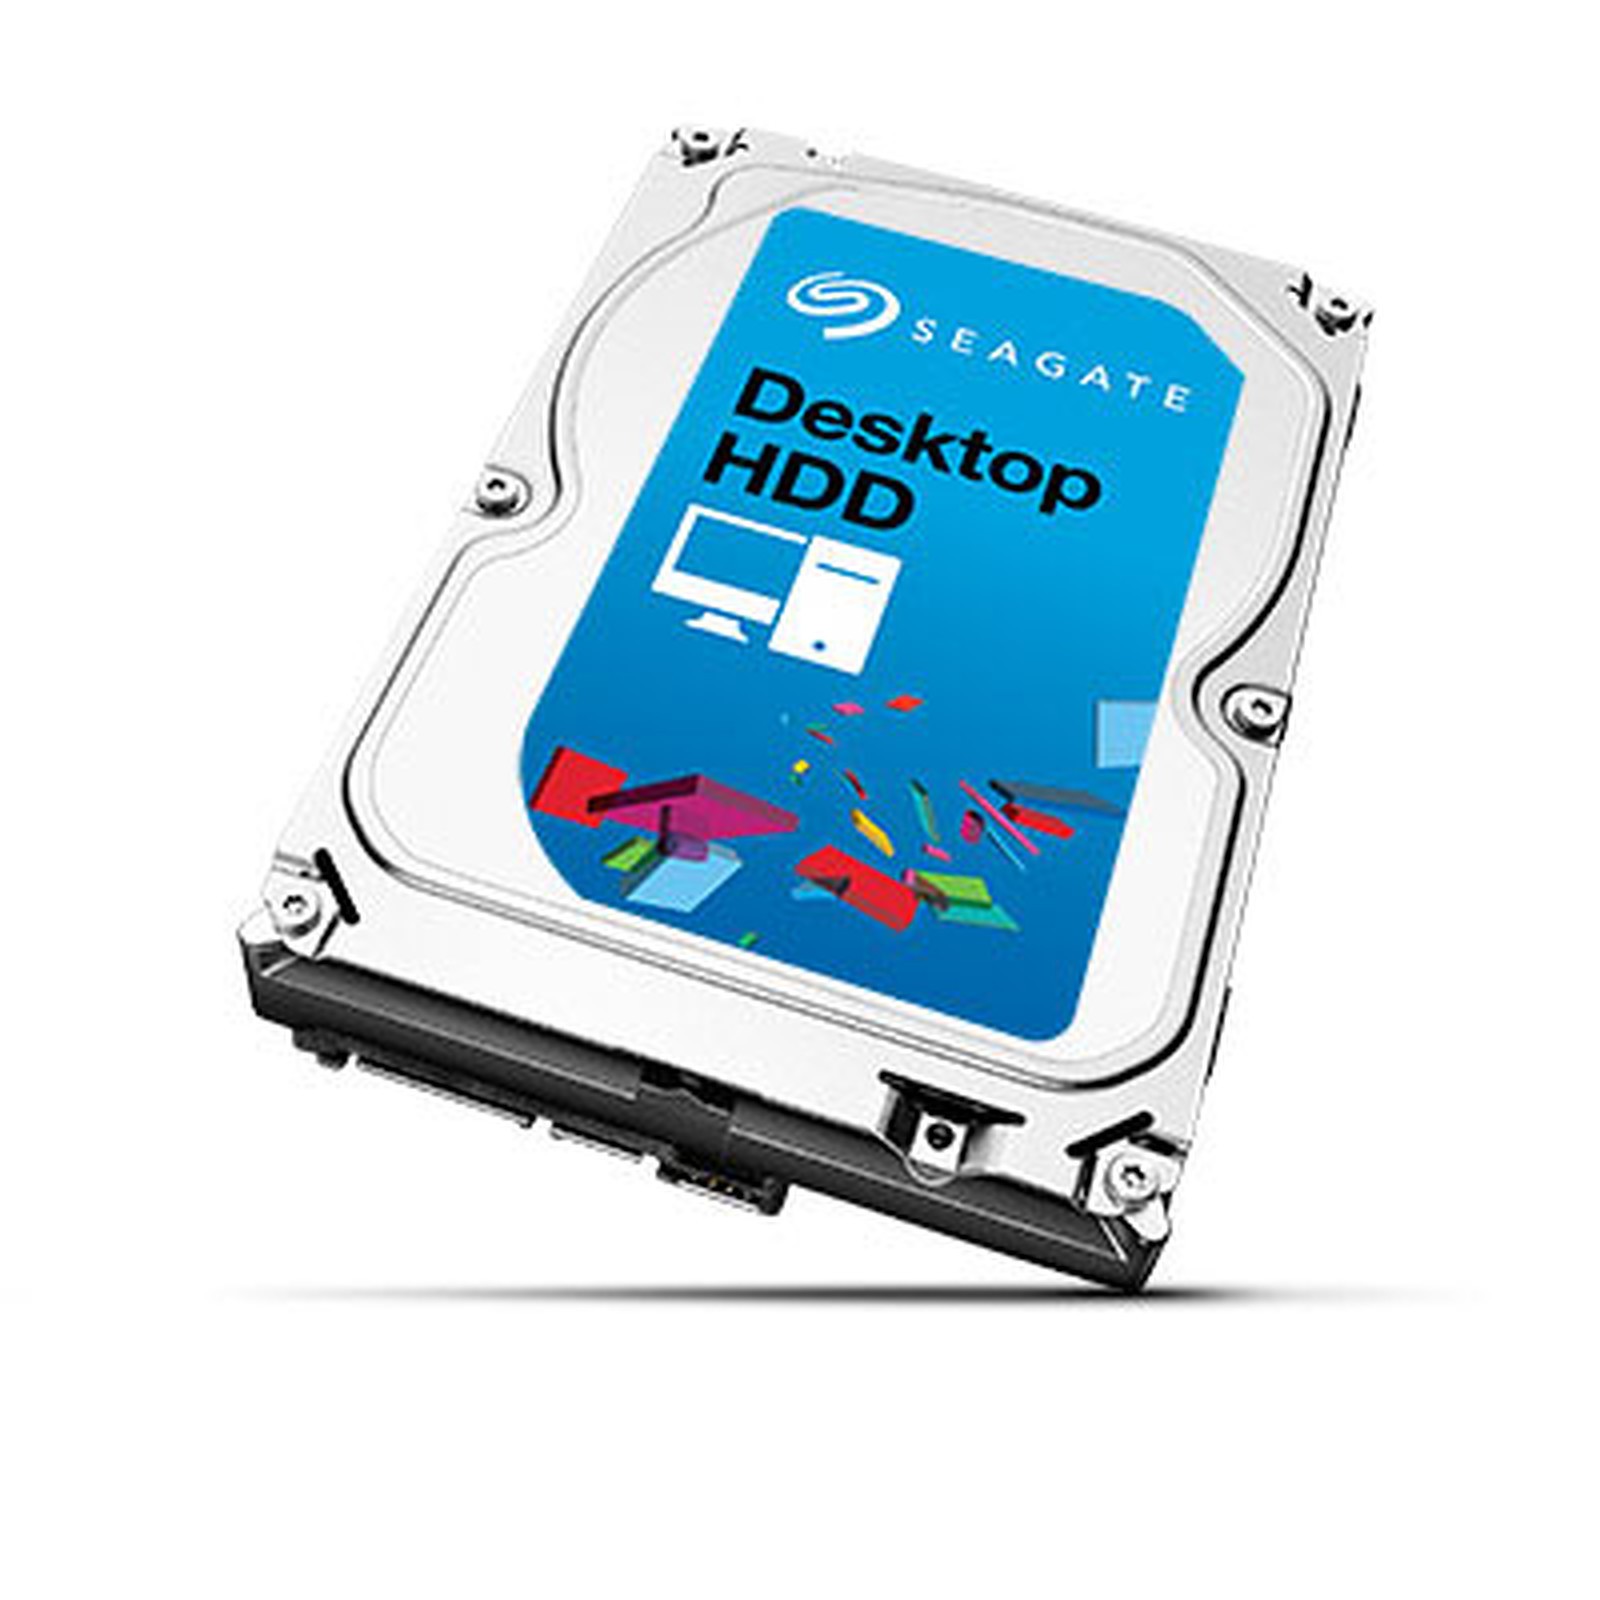 WD Red 4 To SATA 6Gb/s - Disque Dur 3,5 4 To 64 Mo Serial ATA 6Gb/s -  WD40EFRX (bulk)